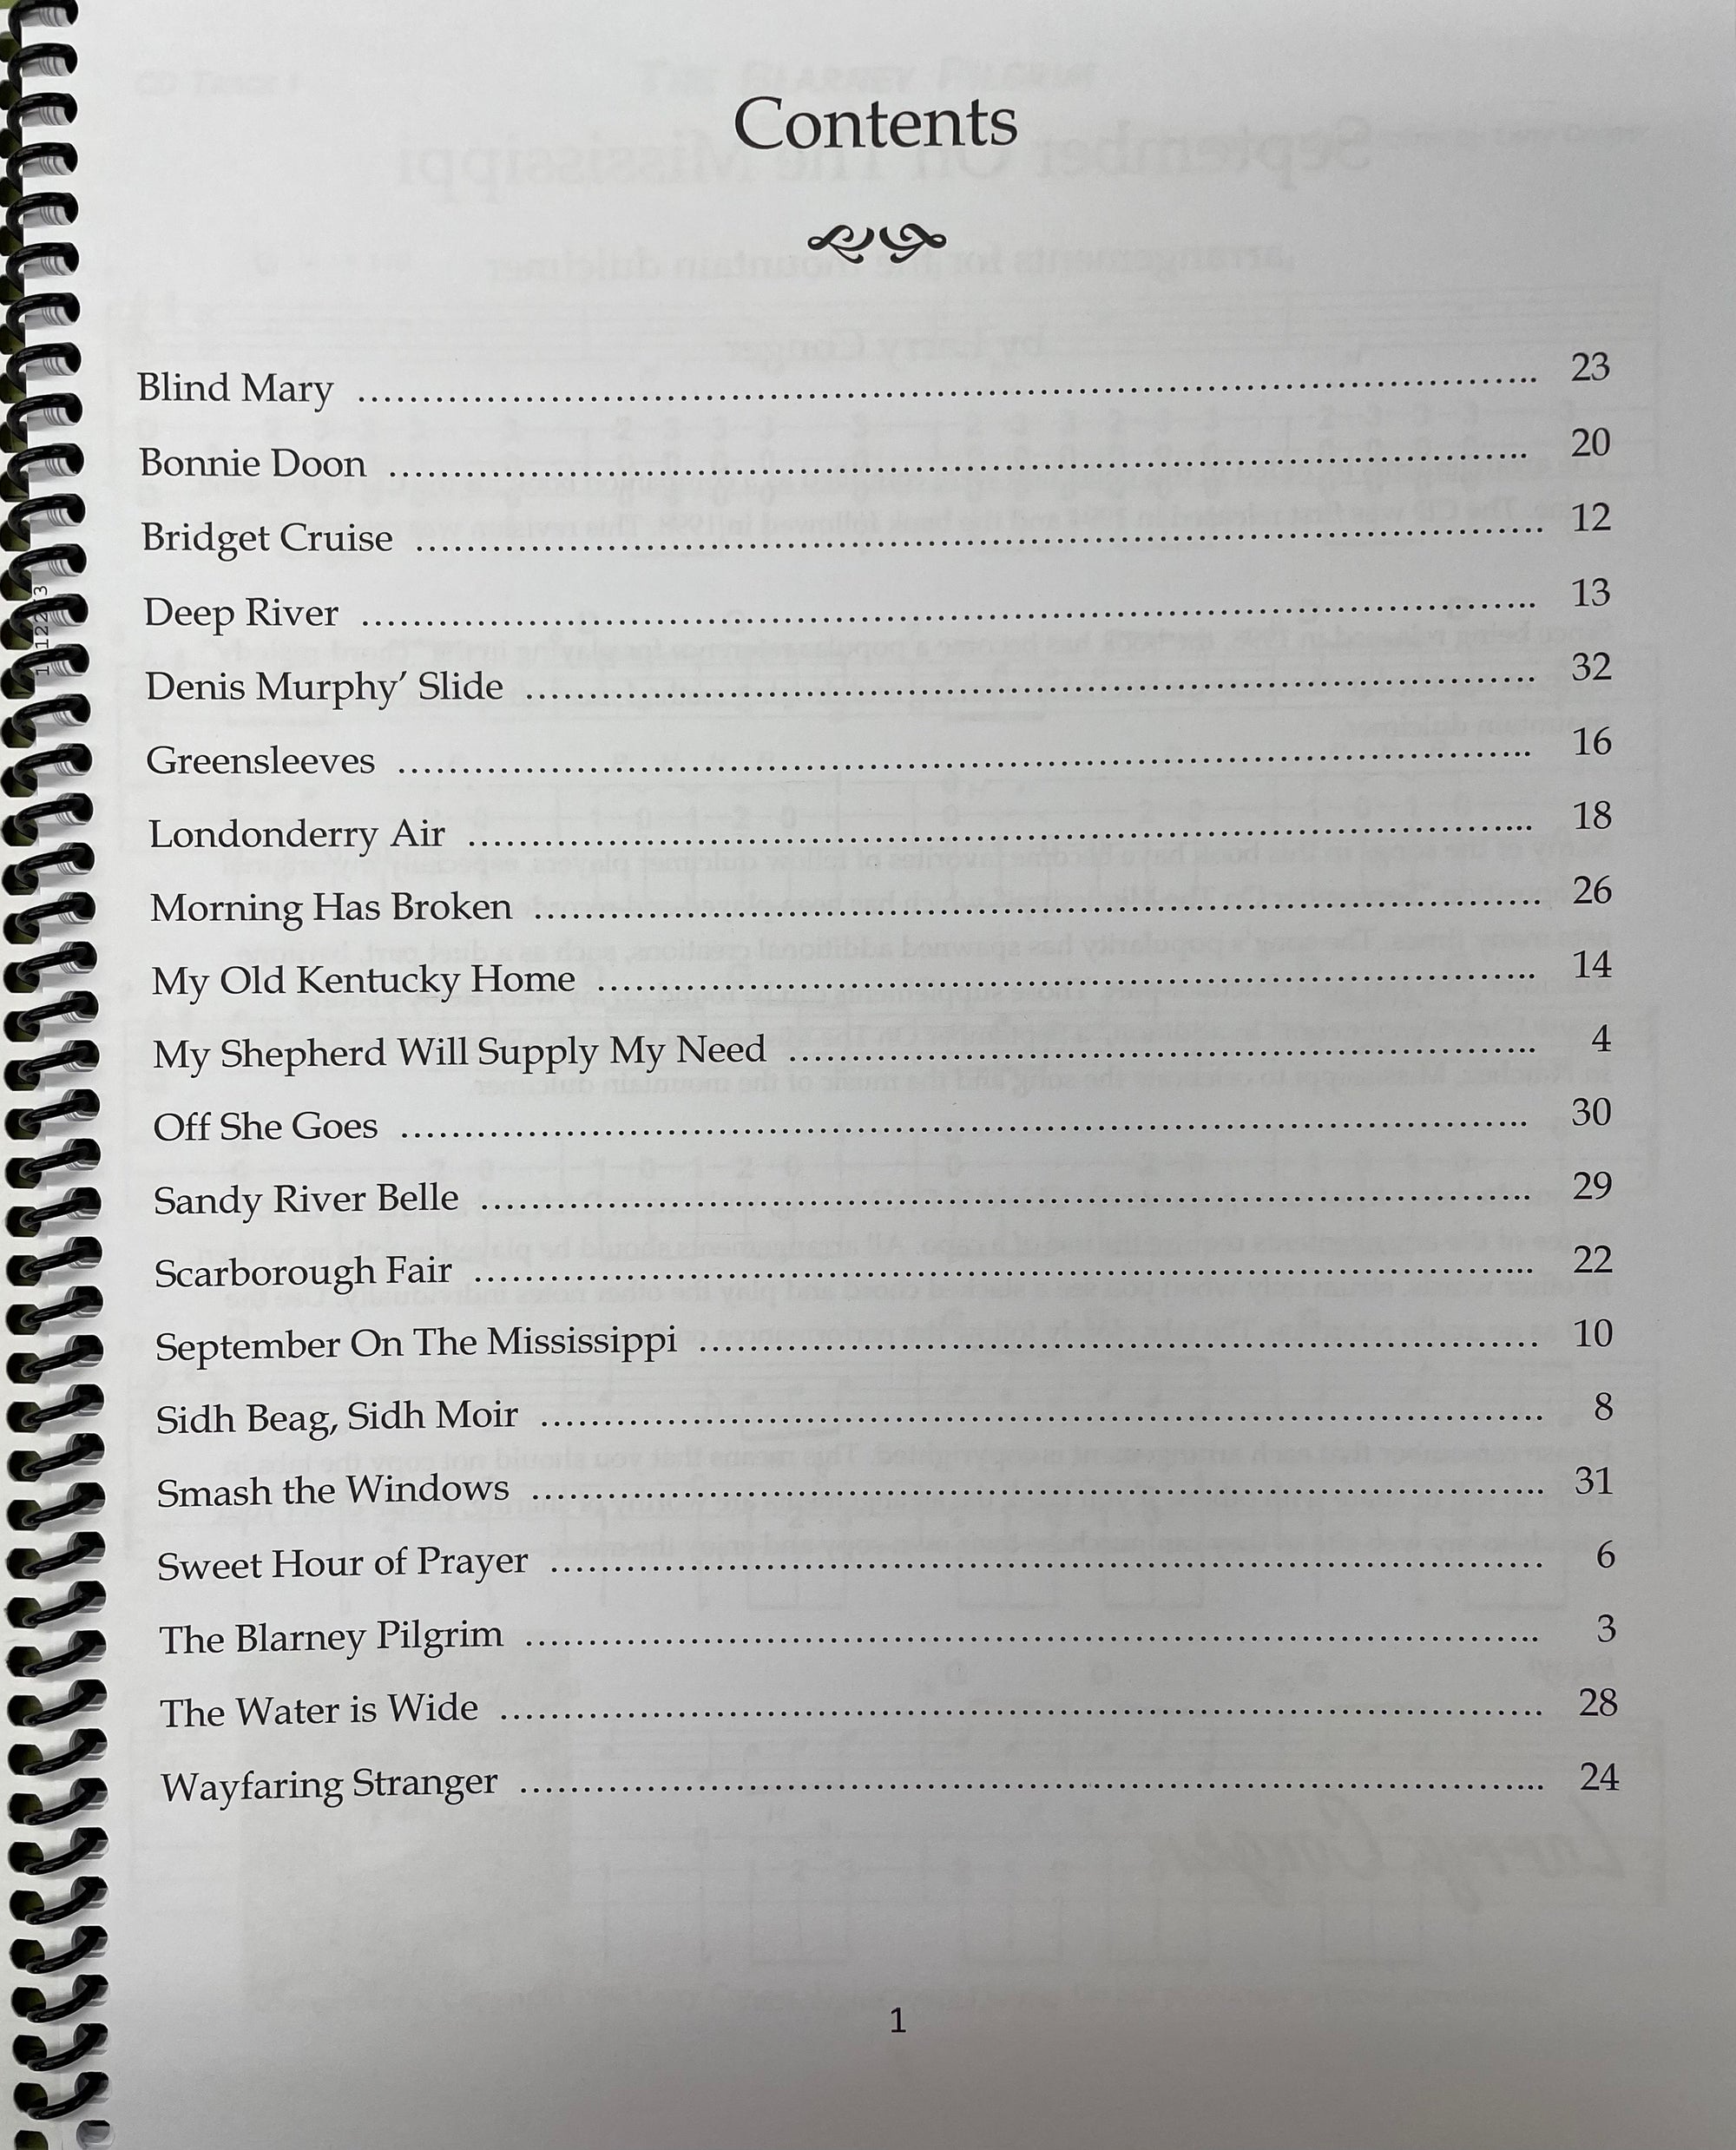 A photograph of a table of contents from "September on the Mississippi Mountain Dulcimer Solos by Larry Conger", listing various song titles with corresponding page numbers.